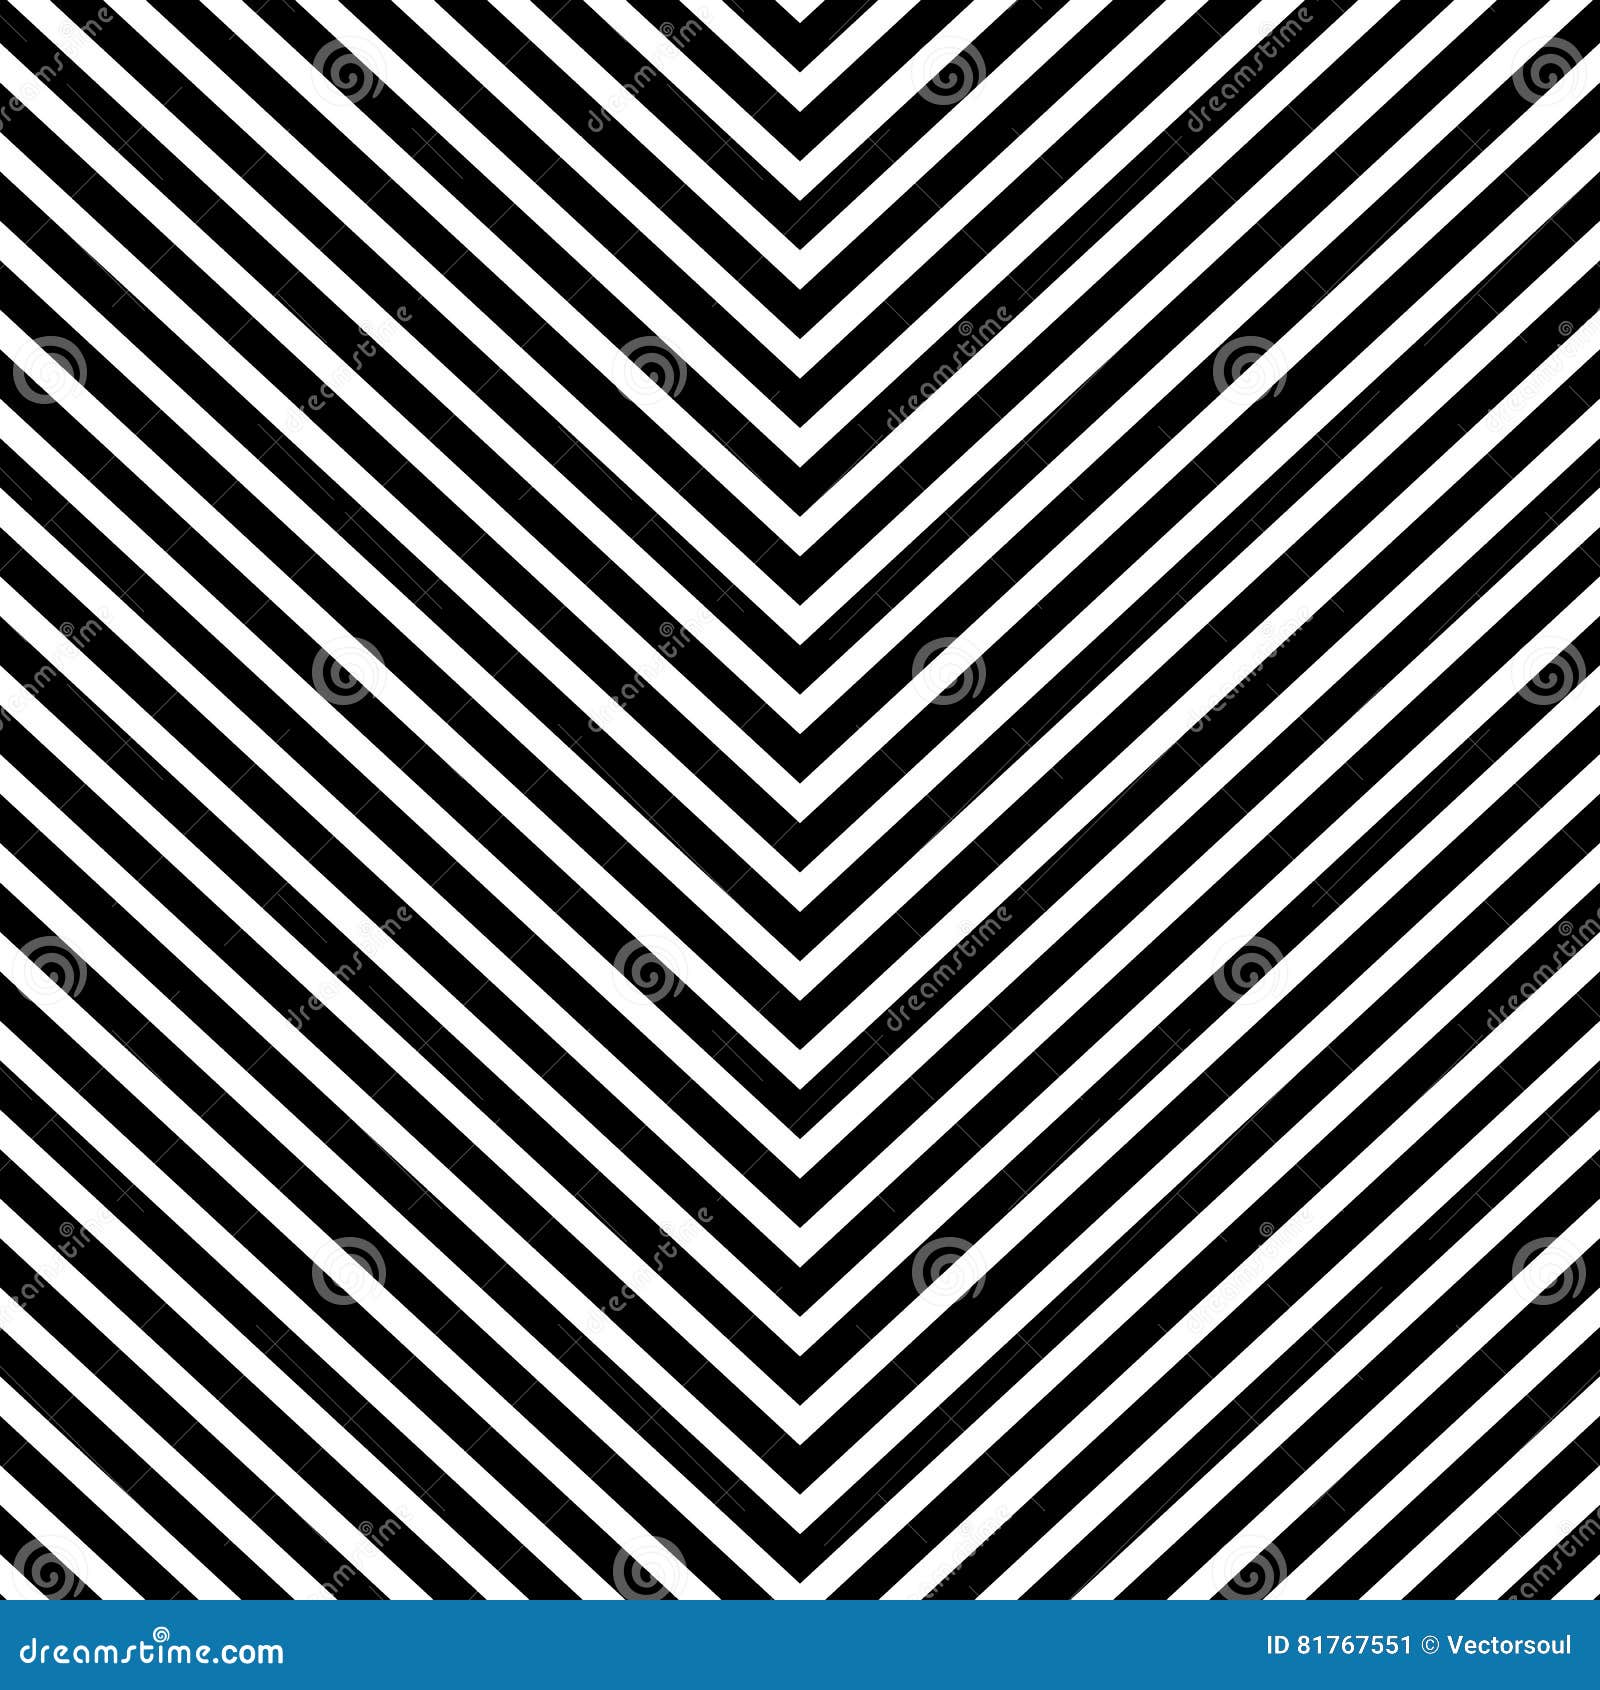 repeatable geometric pattern with slanting, oblique lines